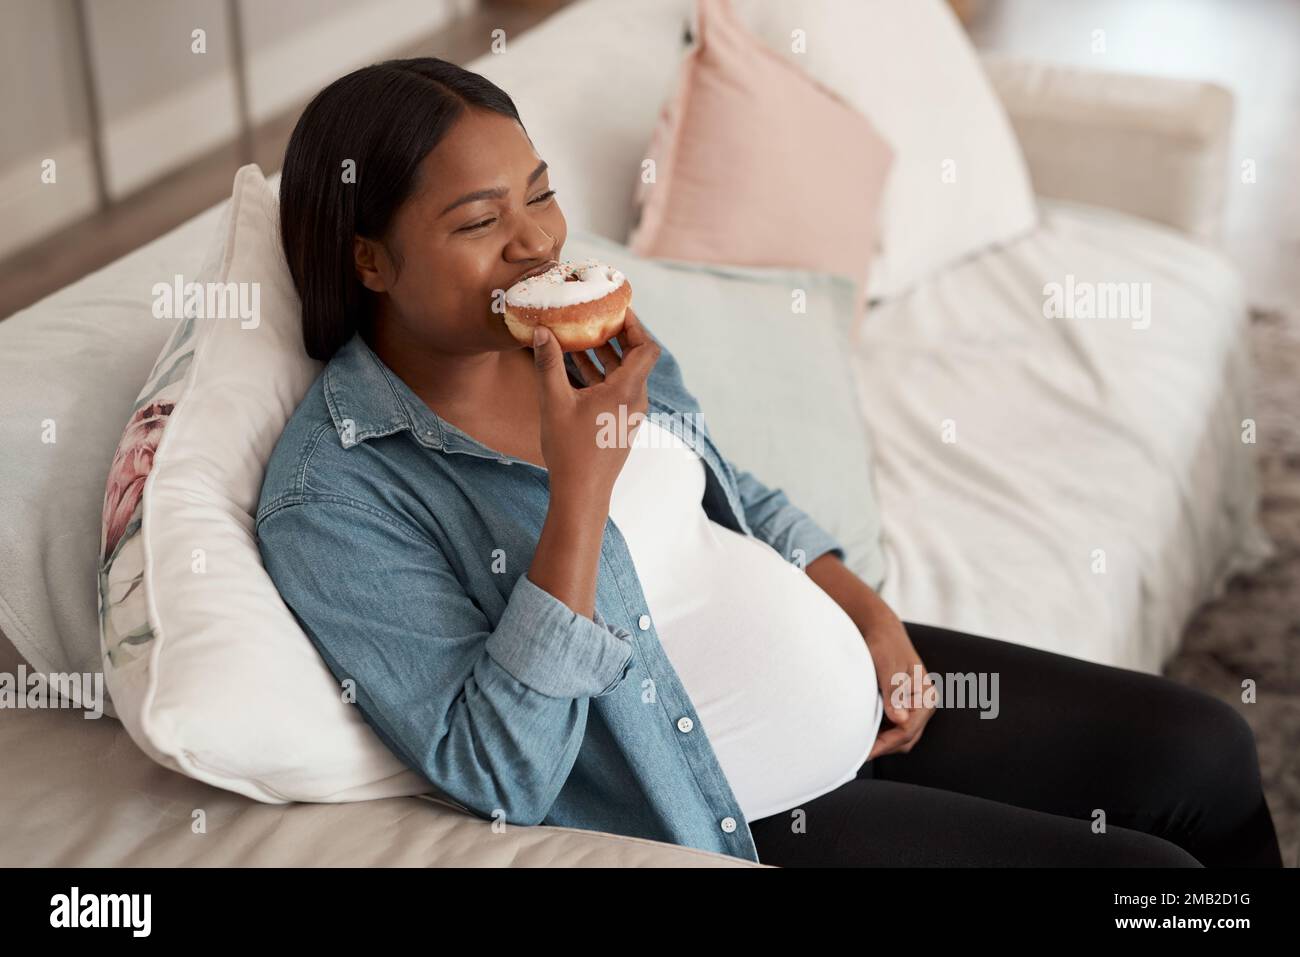 Giving in to her pregnancy cravings. a pregnant woman eating a donut at home. Stock Photo